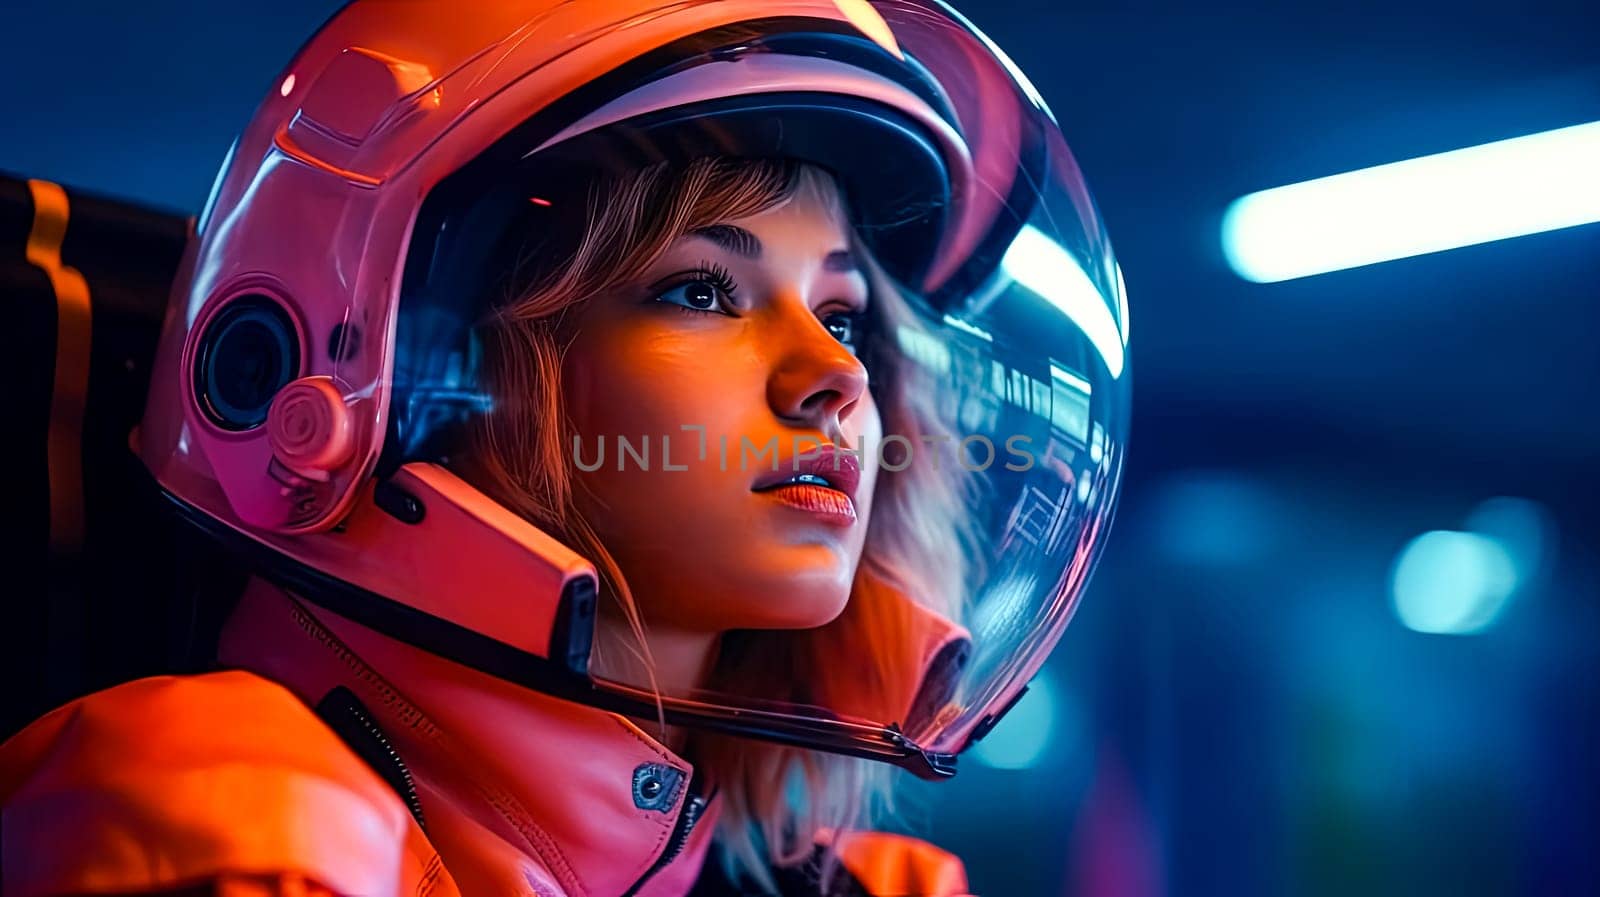 A close up reveals the resilience in the eyes of a female astronaut, adorned in a sleek spacesuit a portrait of strength in the vastness of space